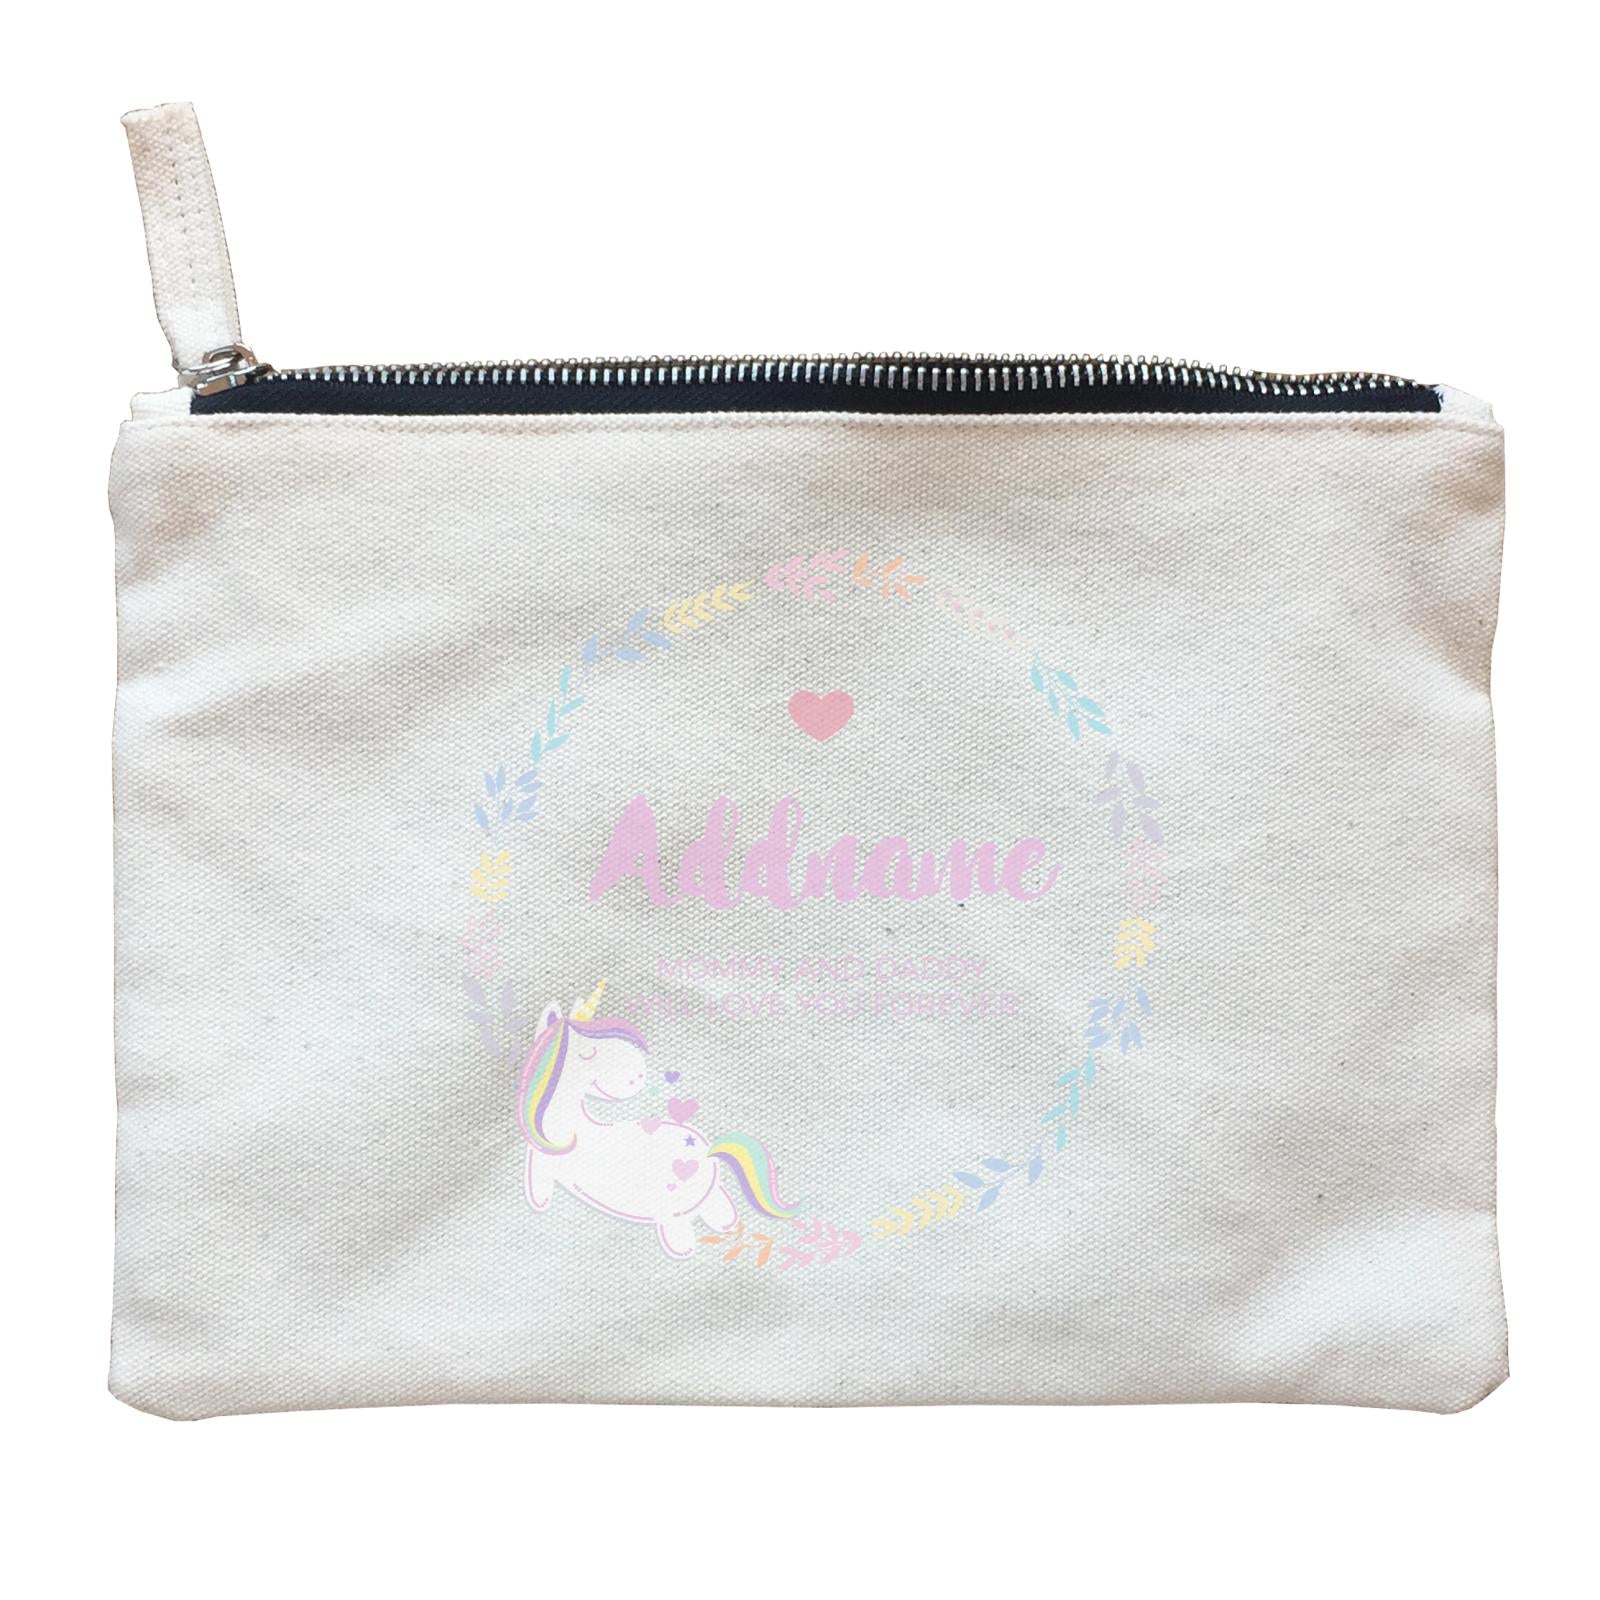 Pastel Colours Leaf Wreath with Unicorn Personalizable with Name and Text Zipper Pouch